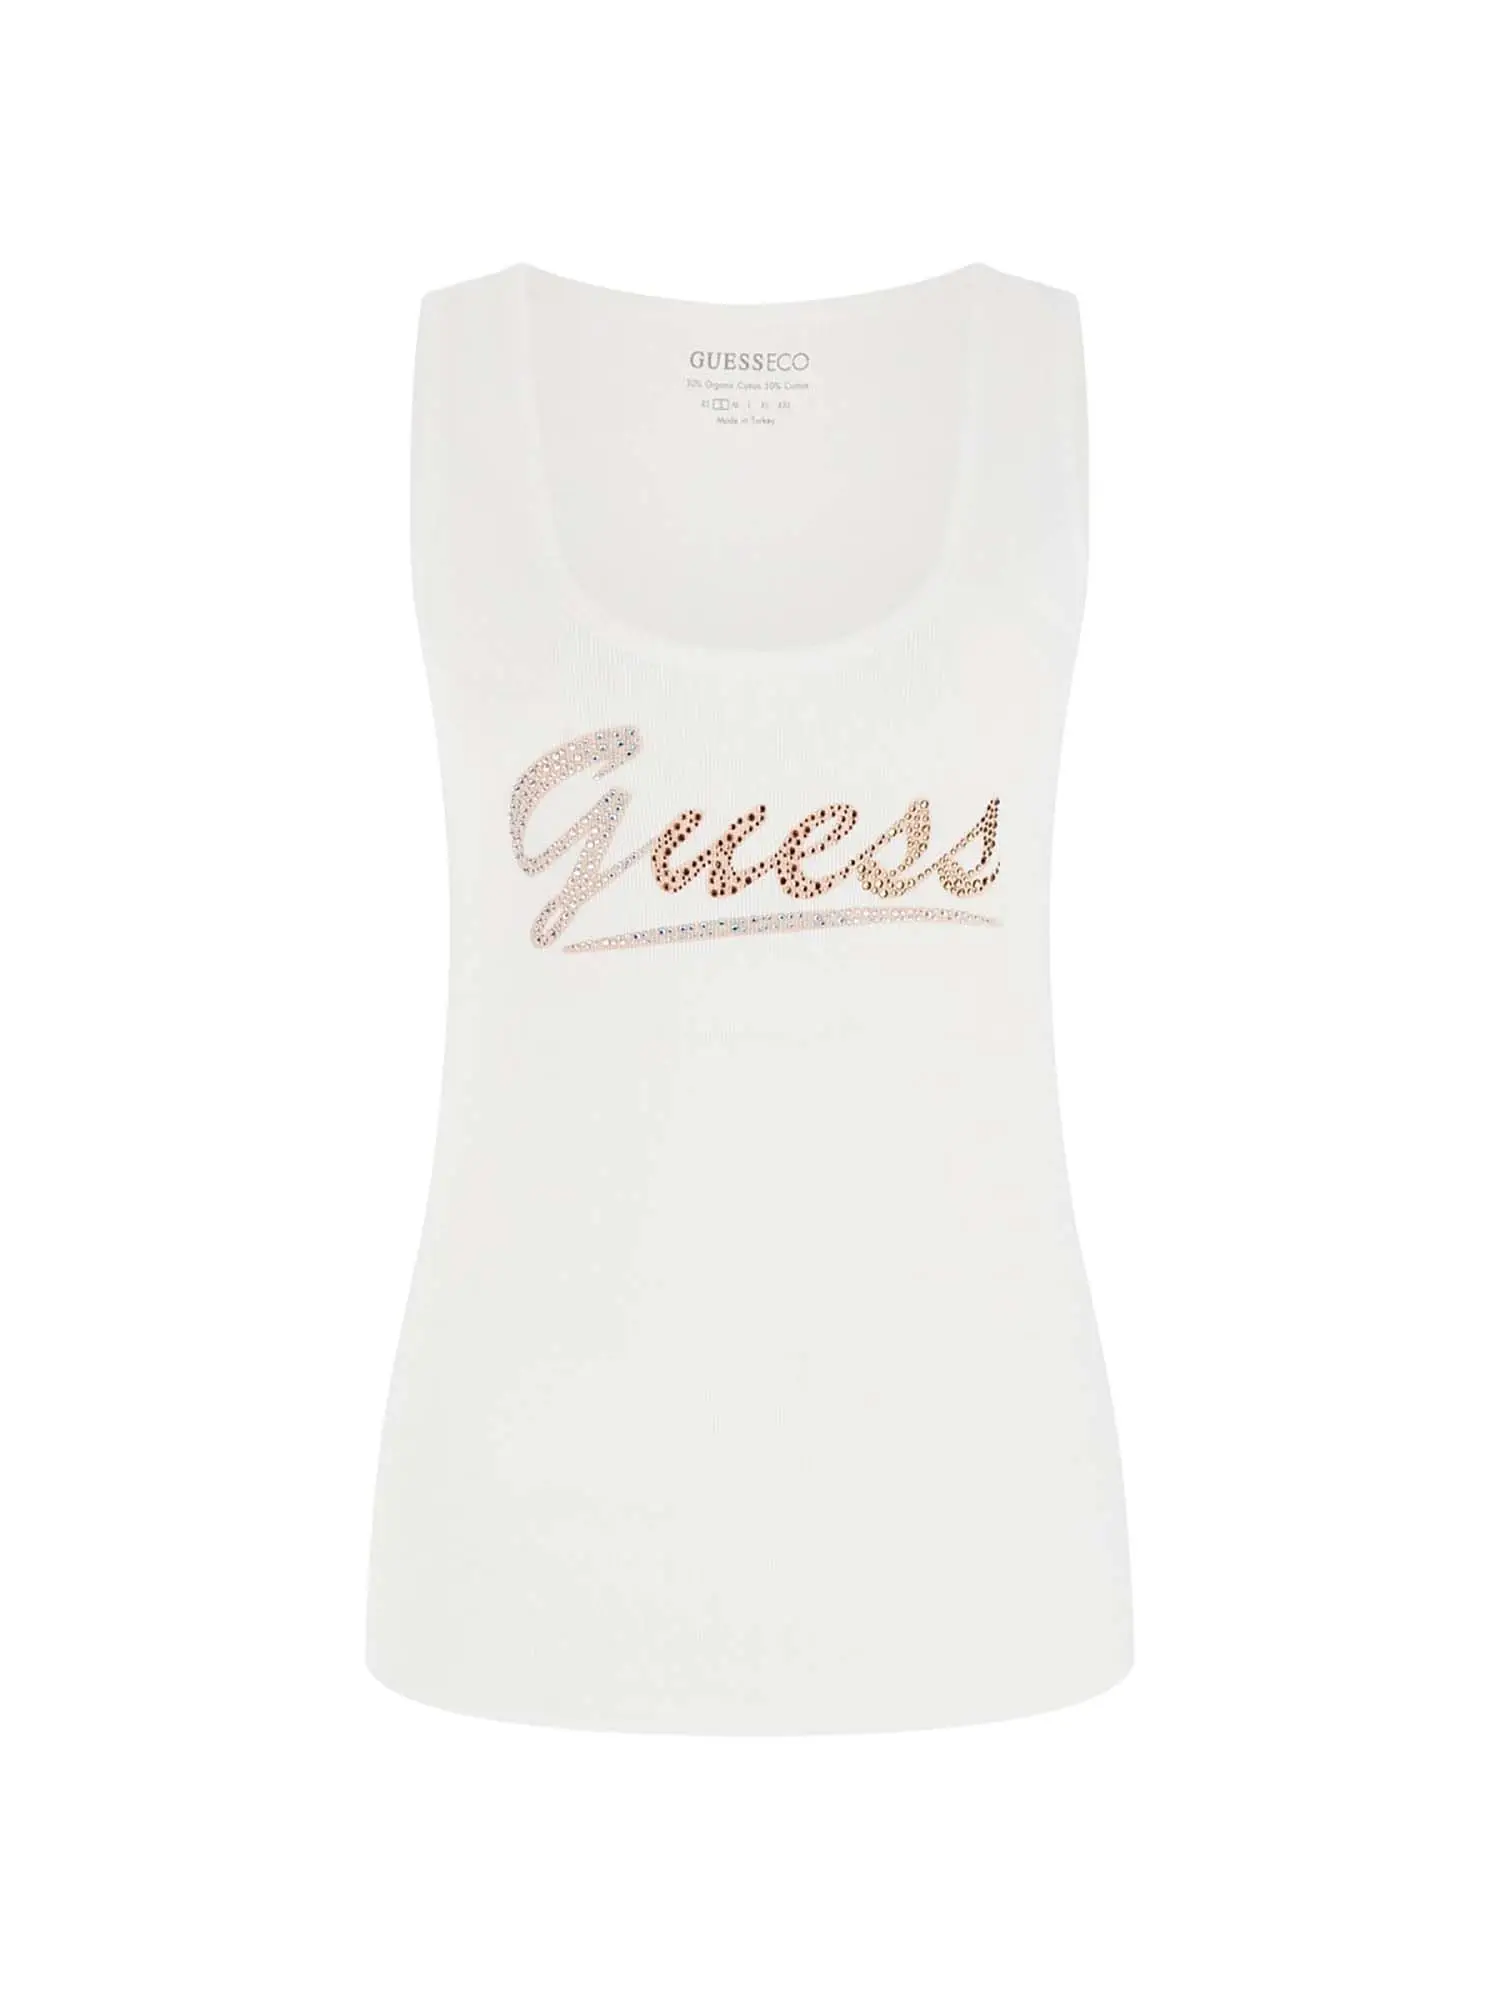 TOP DONNA - GUESS JEANS - W4GP16 K1814 - BIANCO, M